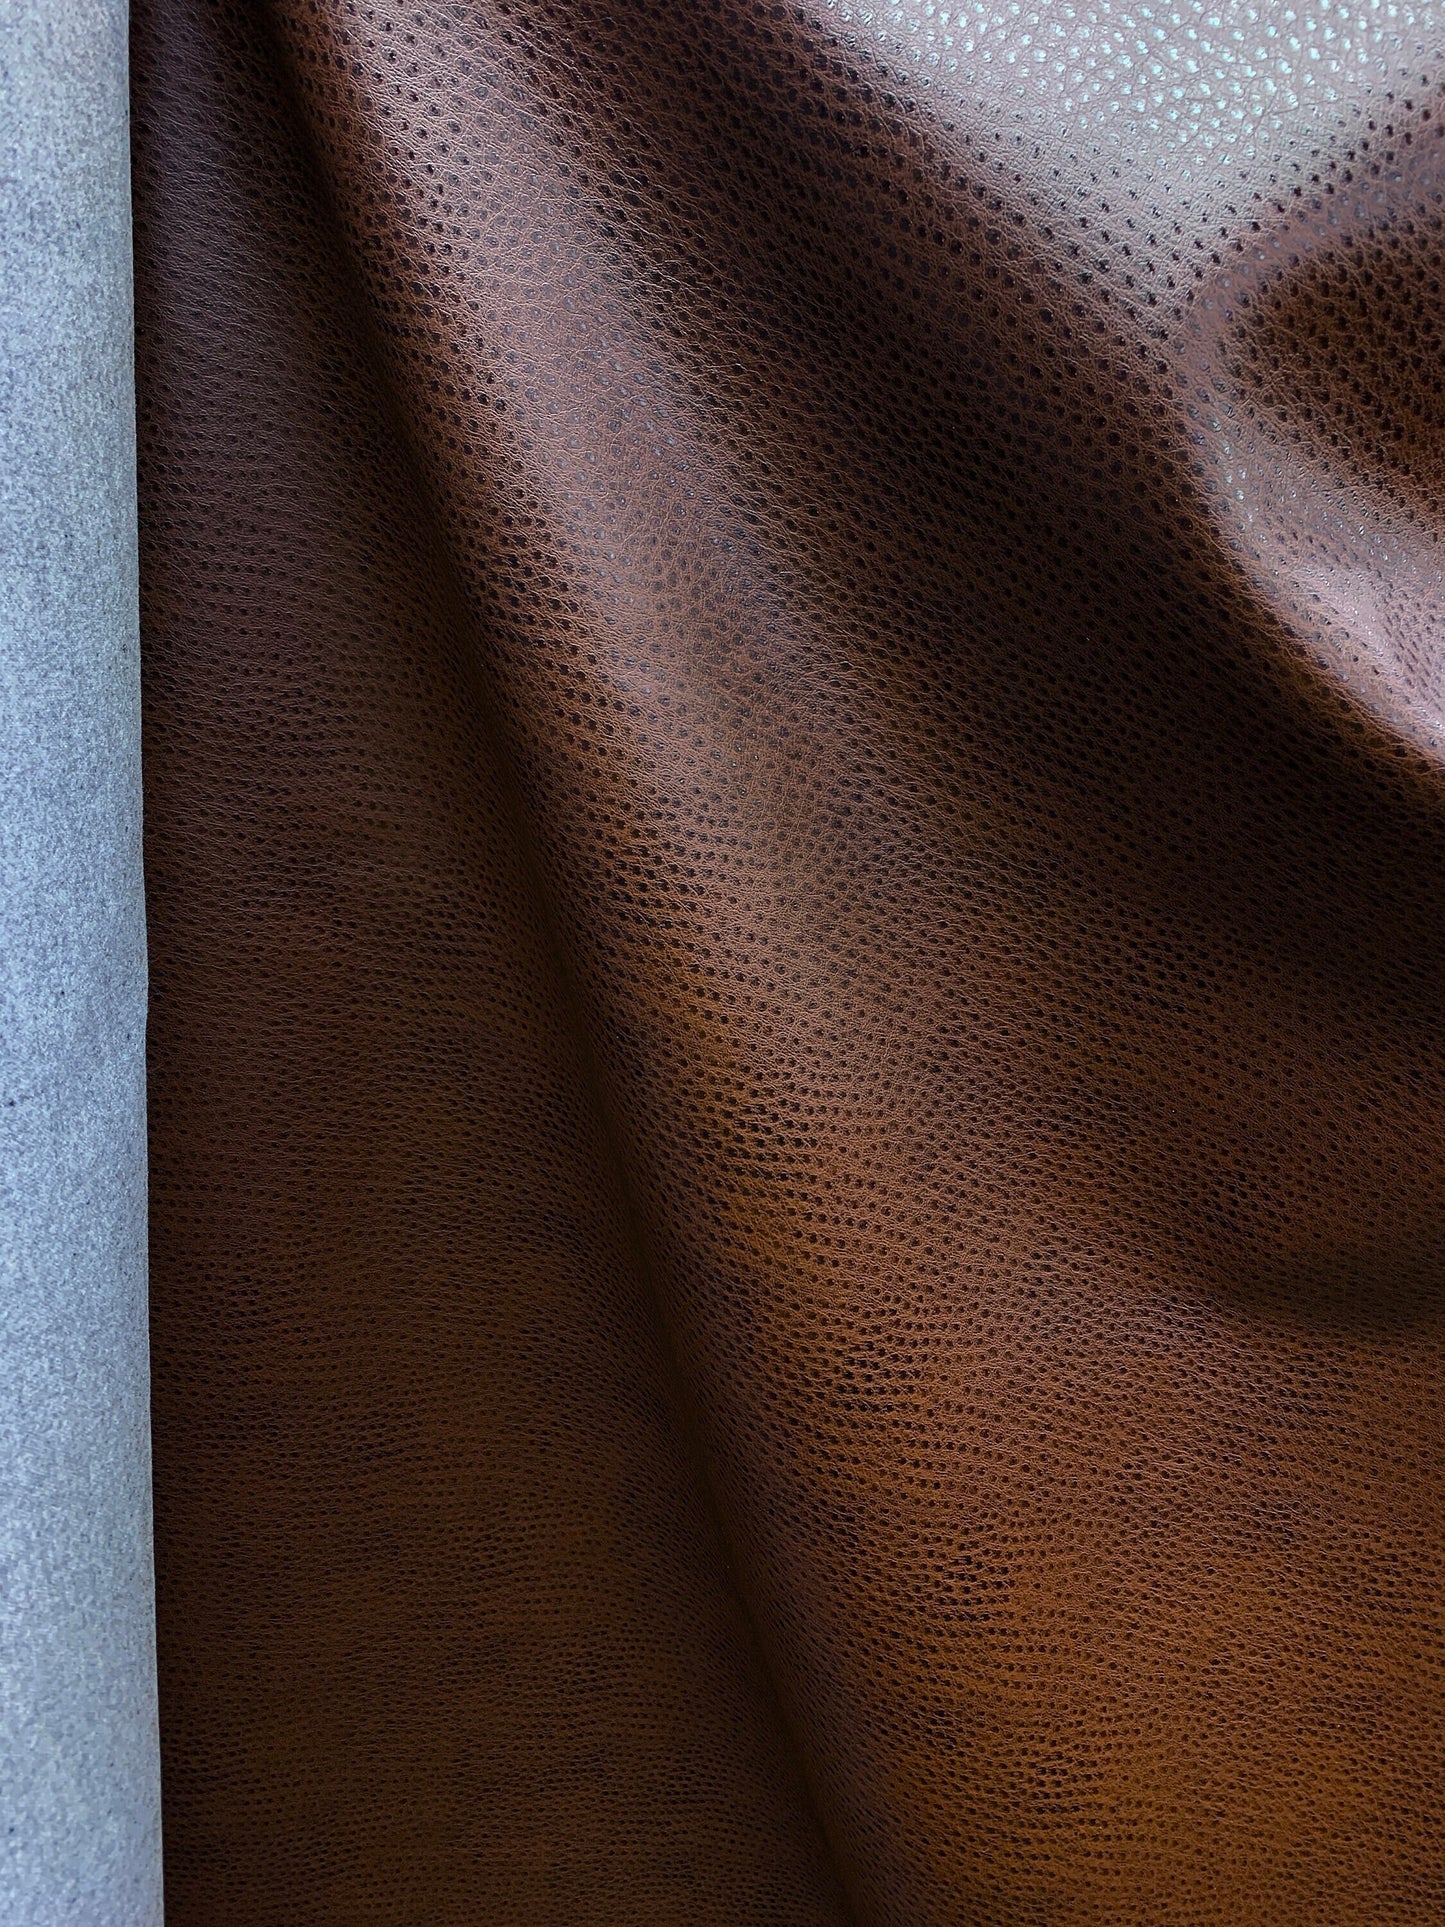 BROWN Ostritch Faux Leather Vinyl Upholstery Fabric (54 in.) Sold By The Yard